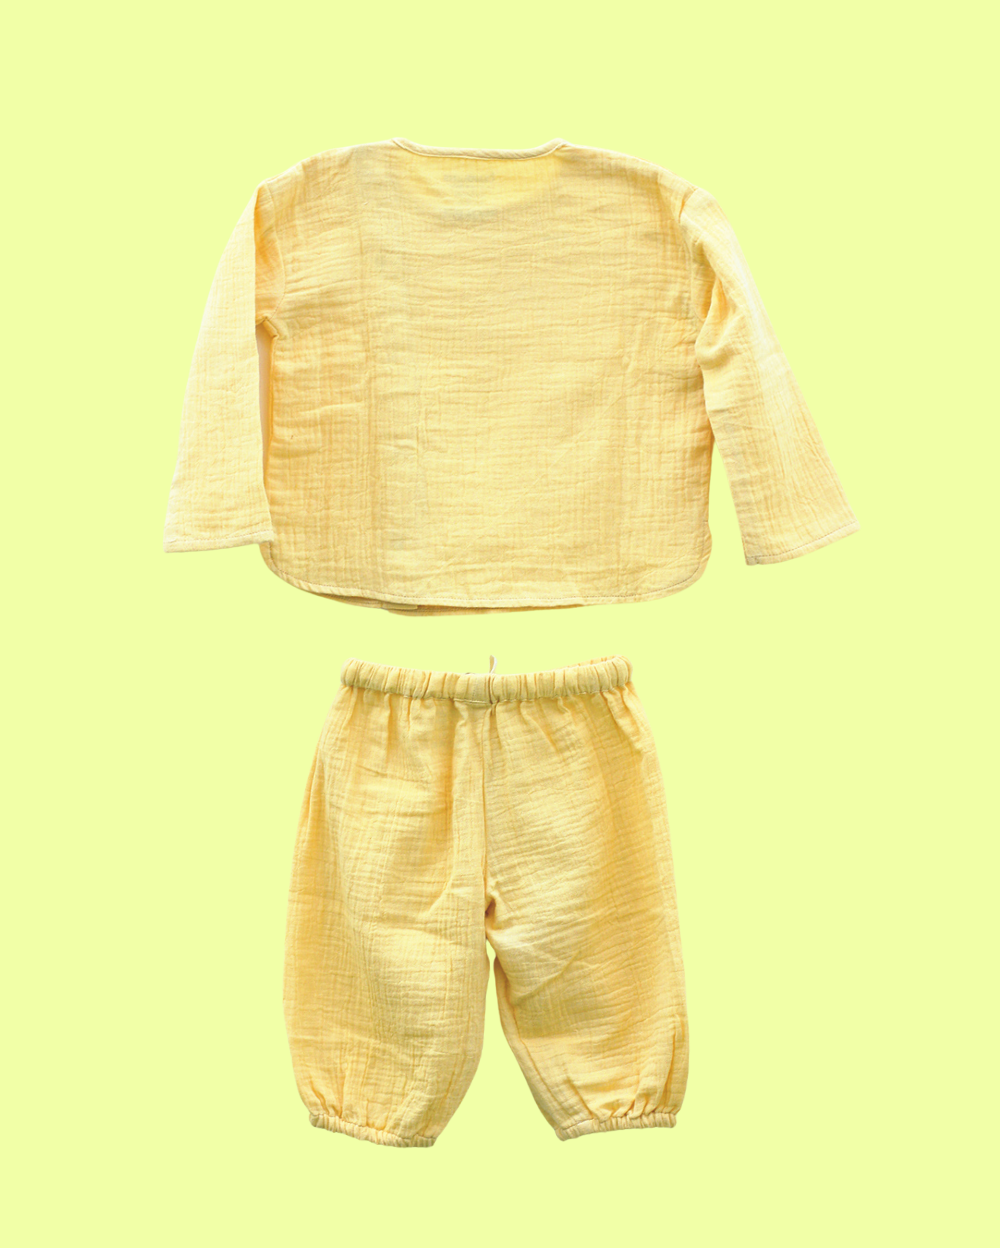 100% Cotton Onesies & Yellow Baby Set for Babies - 3 Piece Set